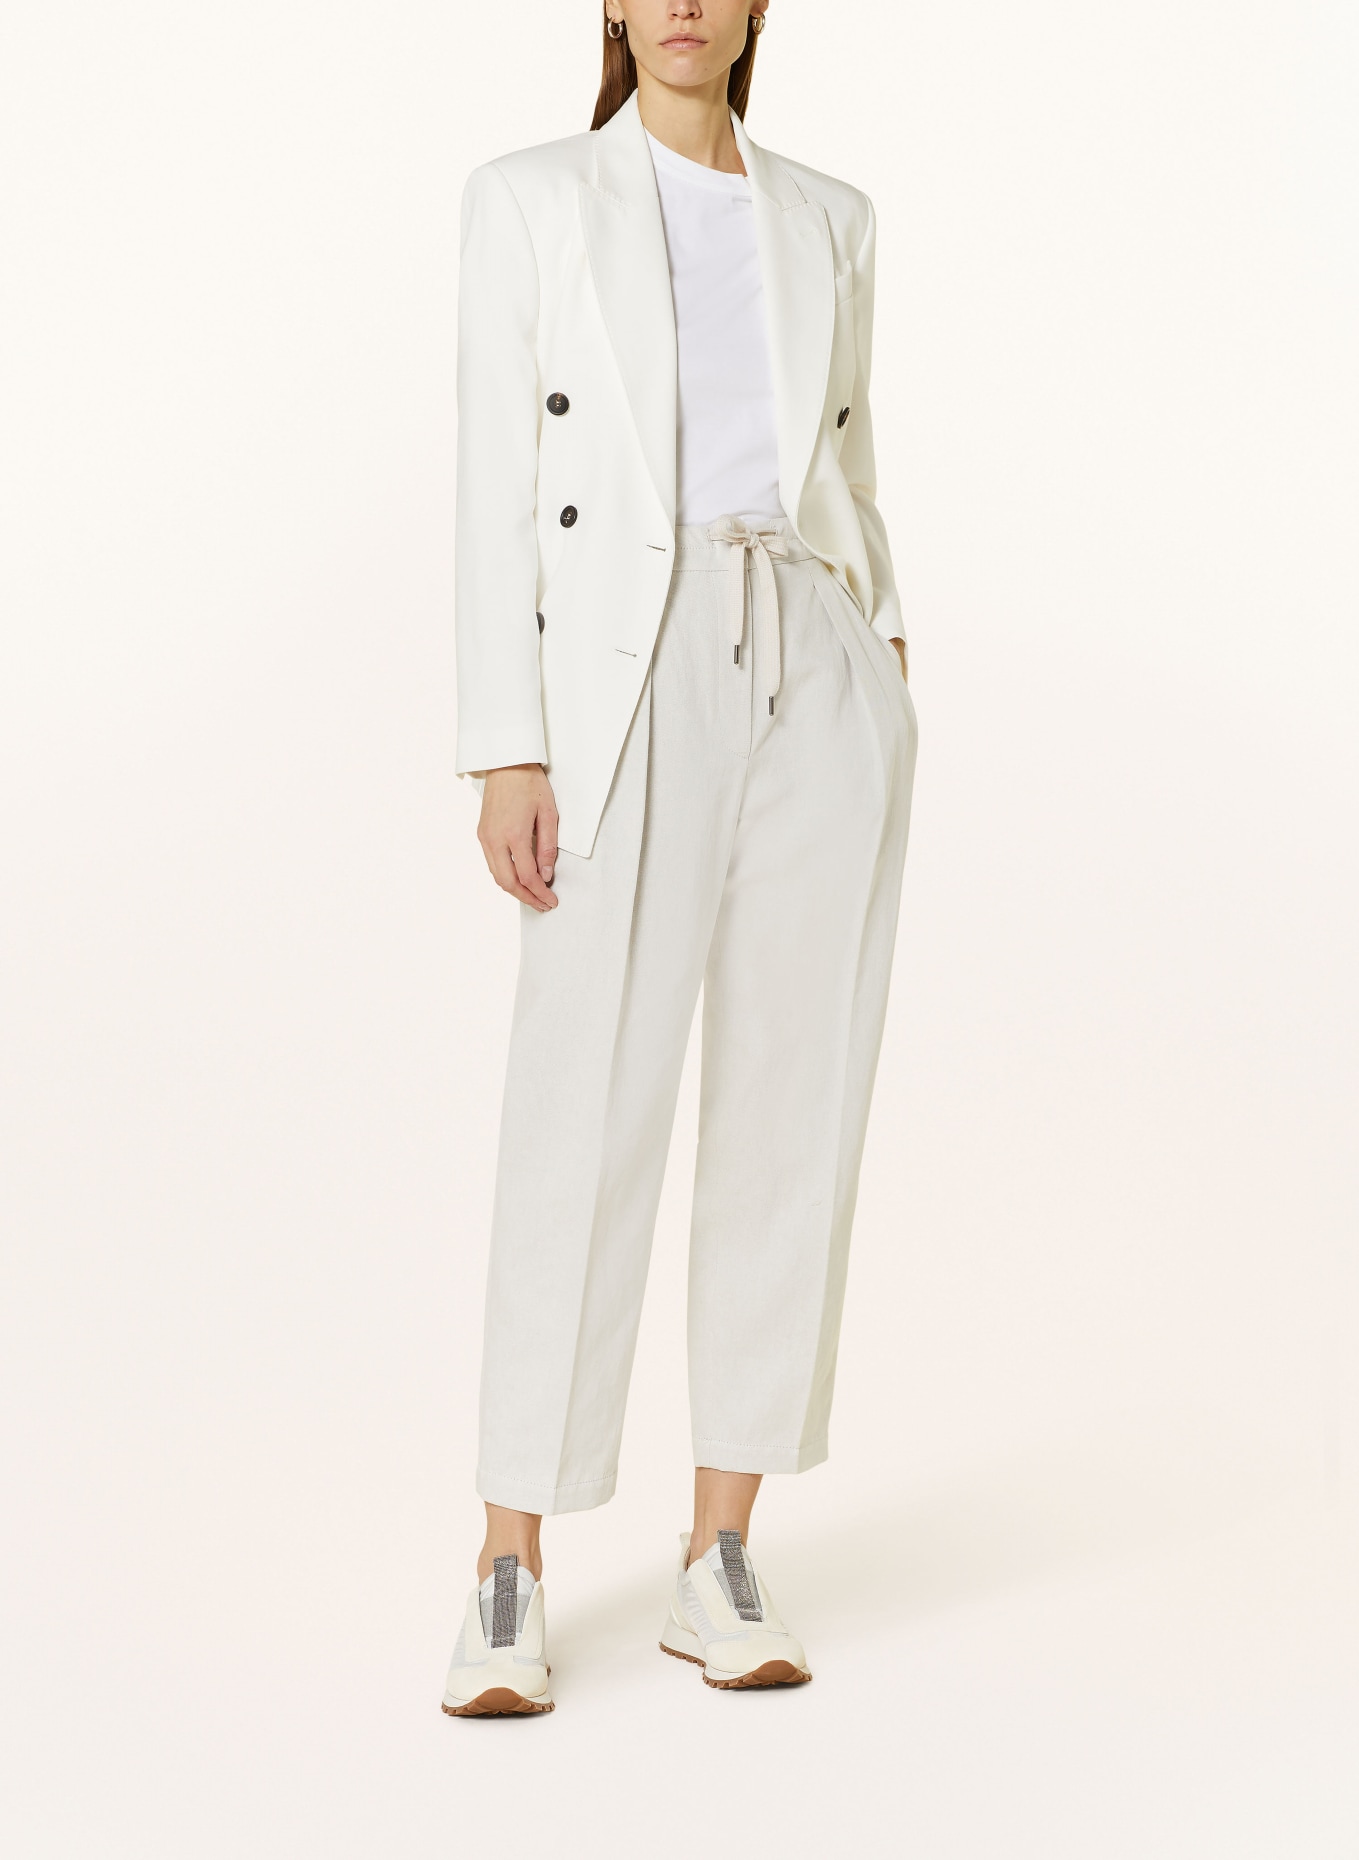 BRUNELLO CUCINELLI Pants in jogger style, Color: LIGHT GRAY (Image 2)